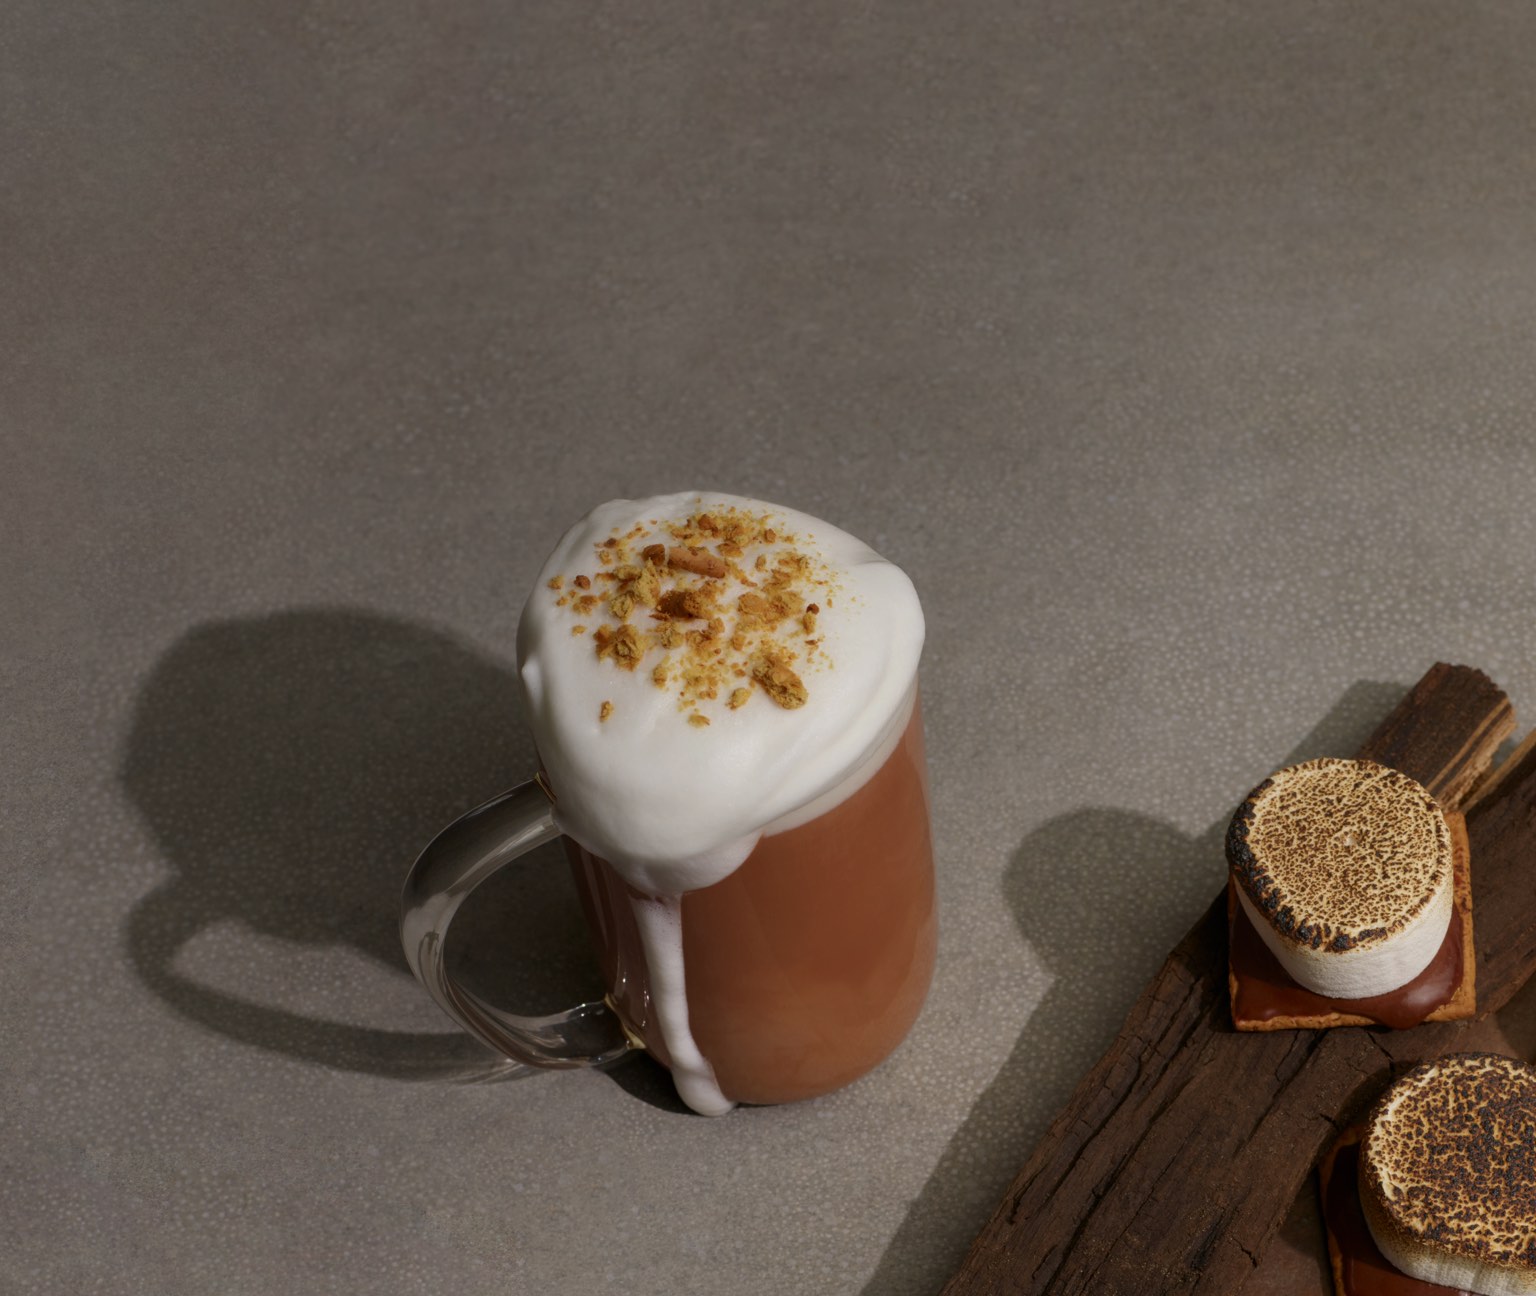 Clear 16 oz glass mug filled with chai latte topped with cinnamon. S’mores dessert with toasted marshmallows.